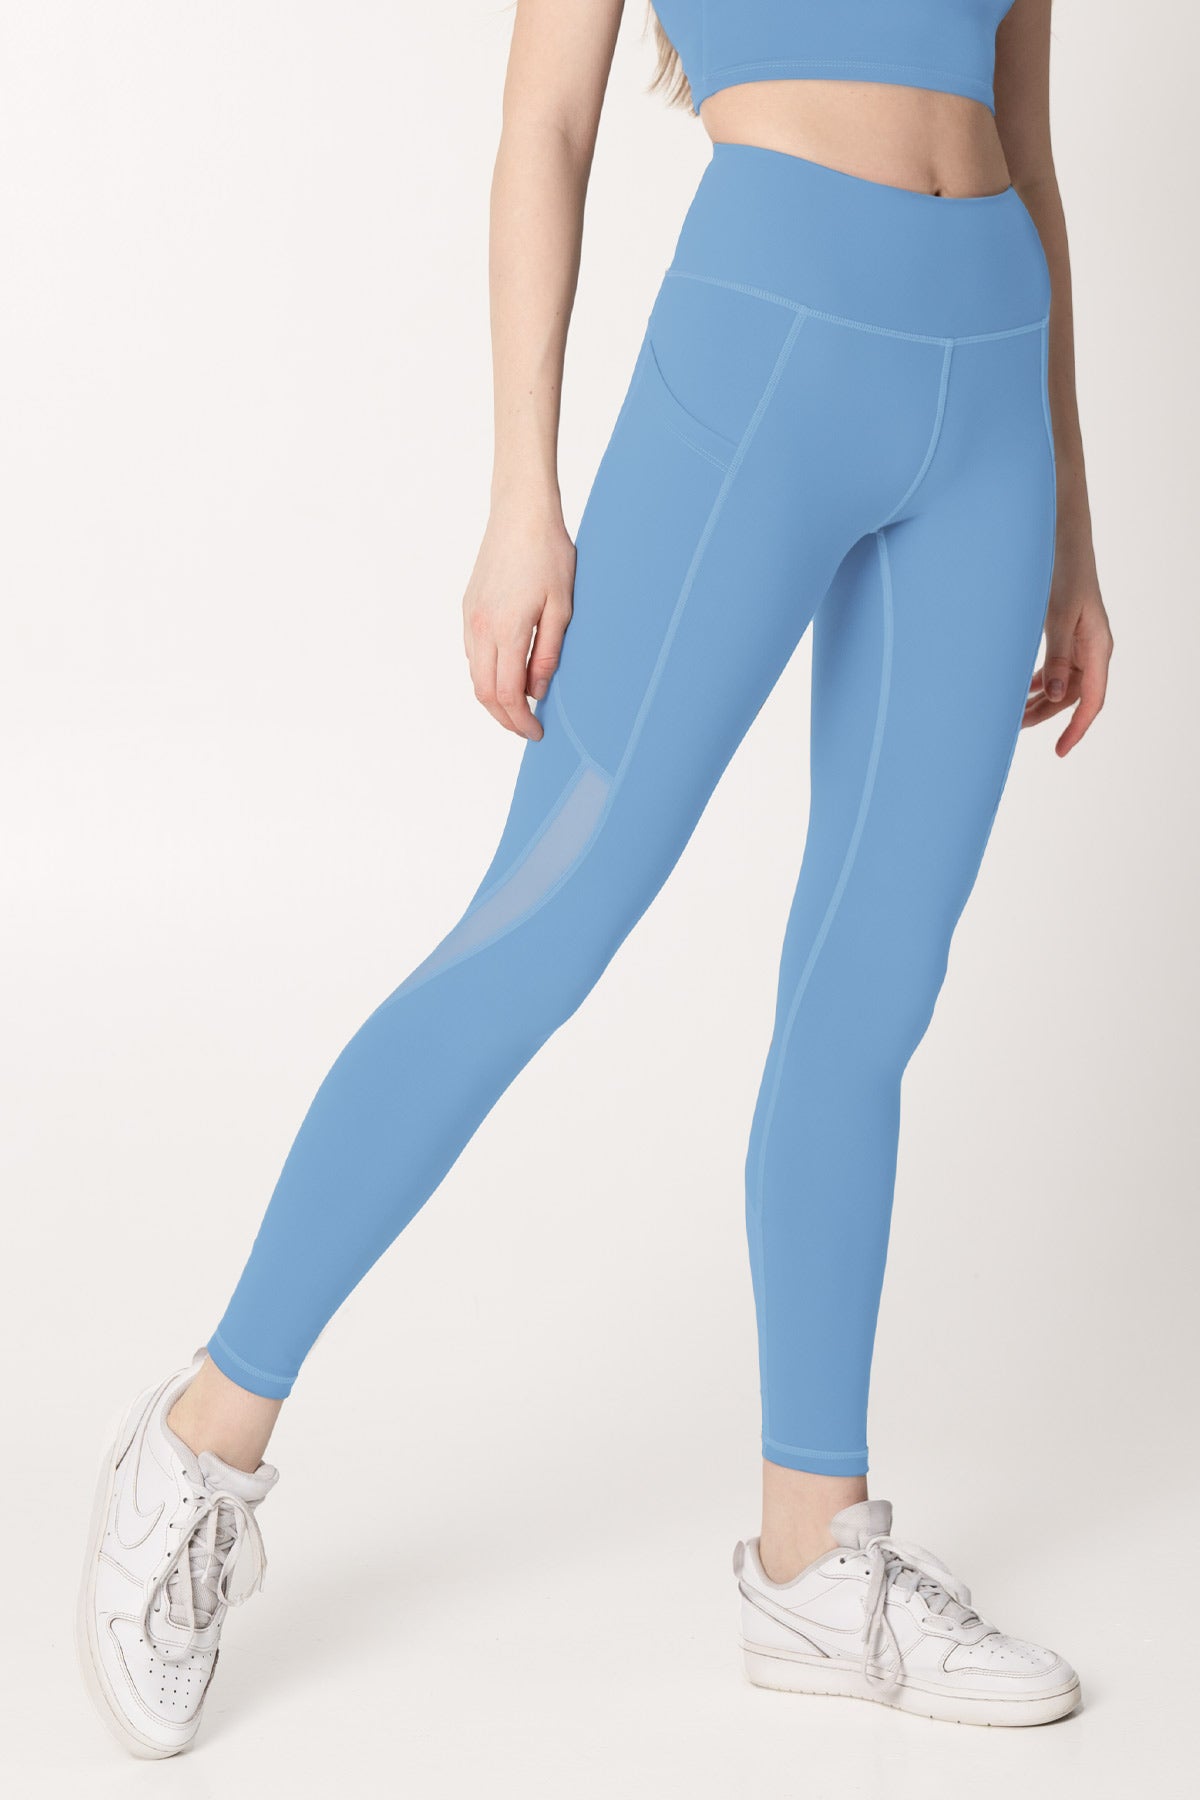 Sky Blue Cassi Workout Leggings Yoga Pants with Mesh & Pockets - Women - Pineapple Clothing